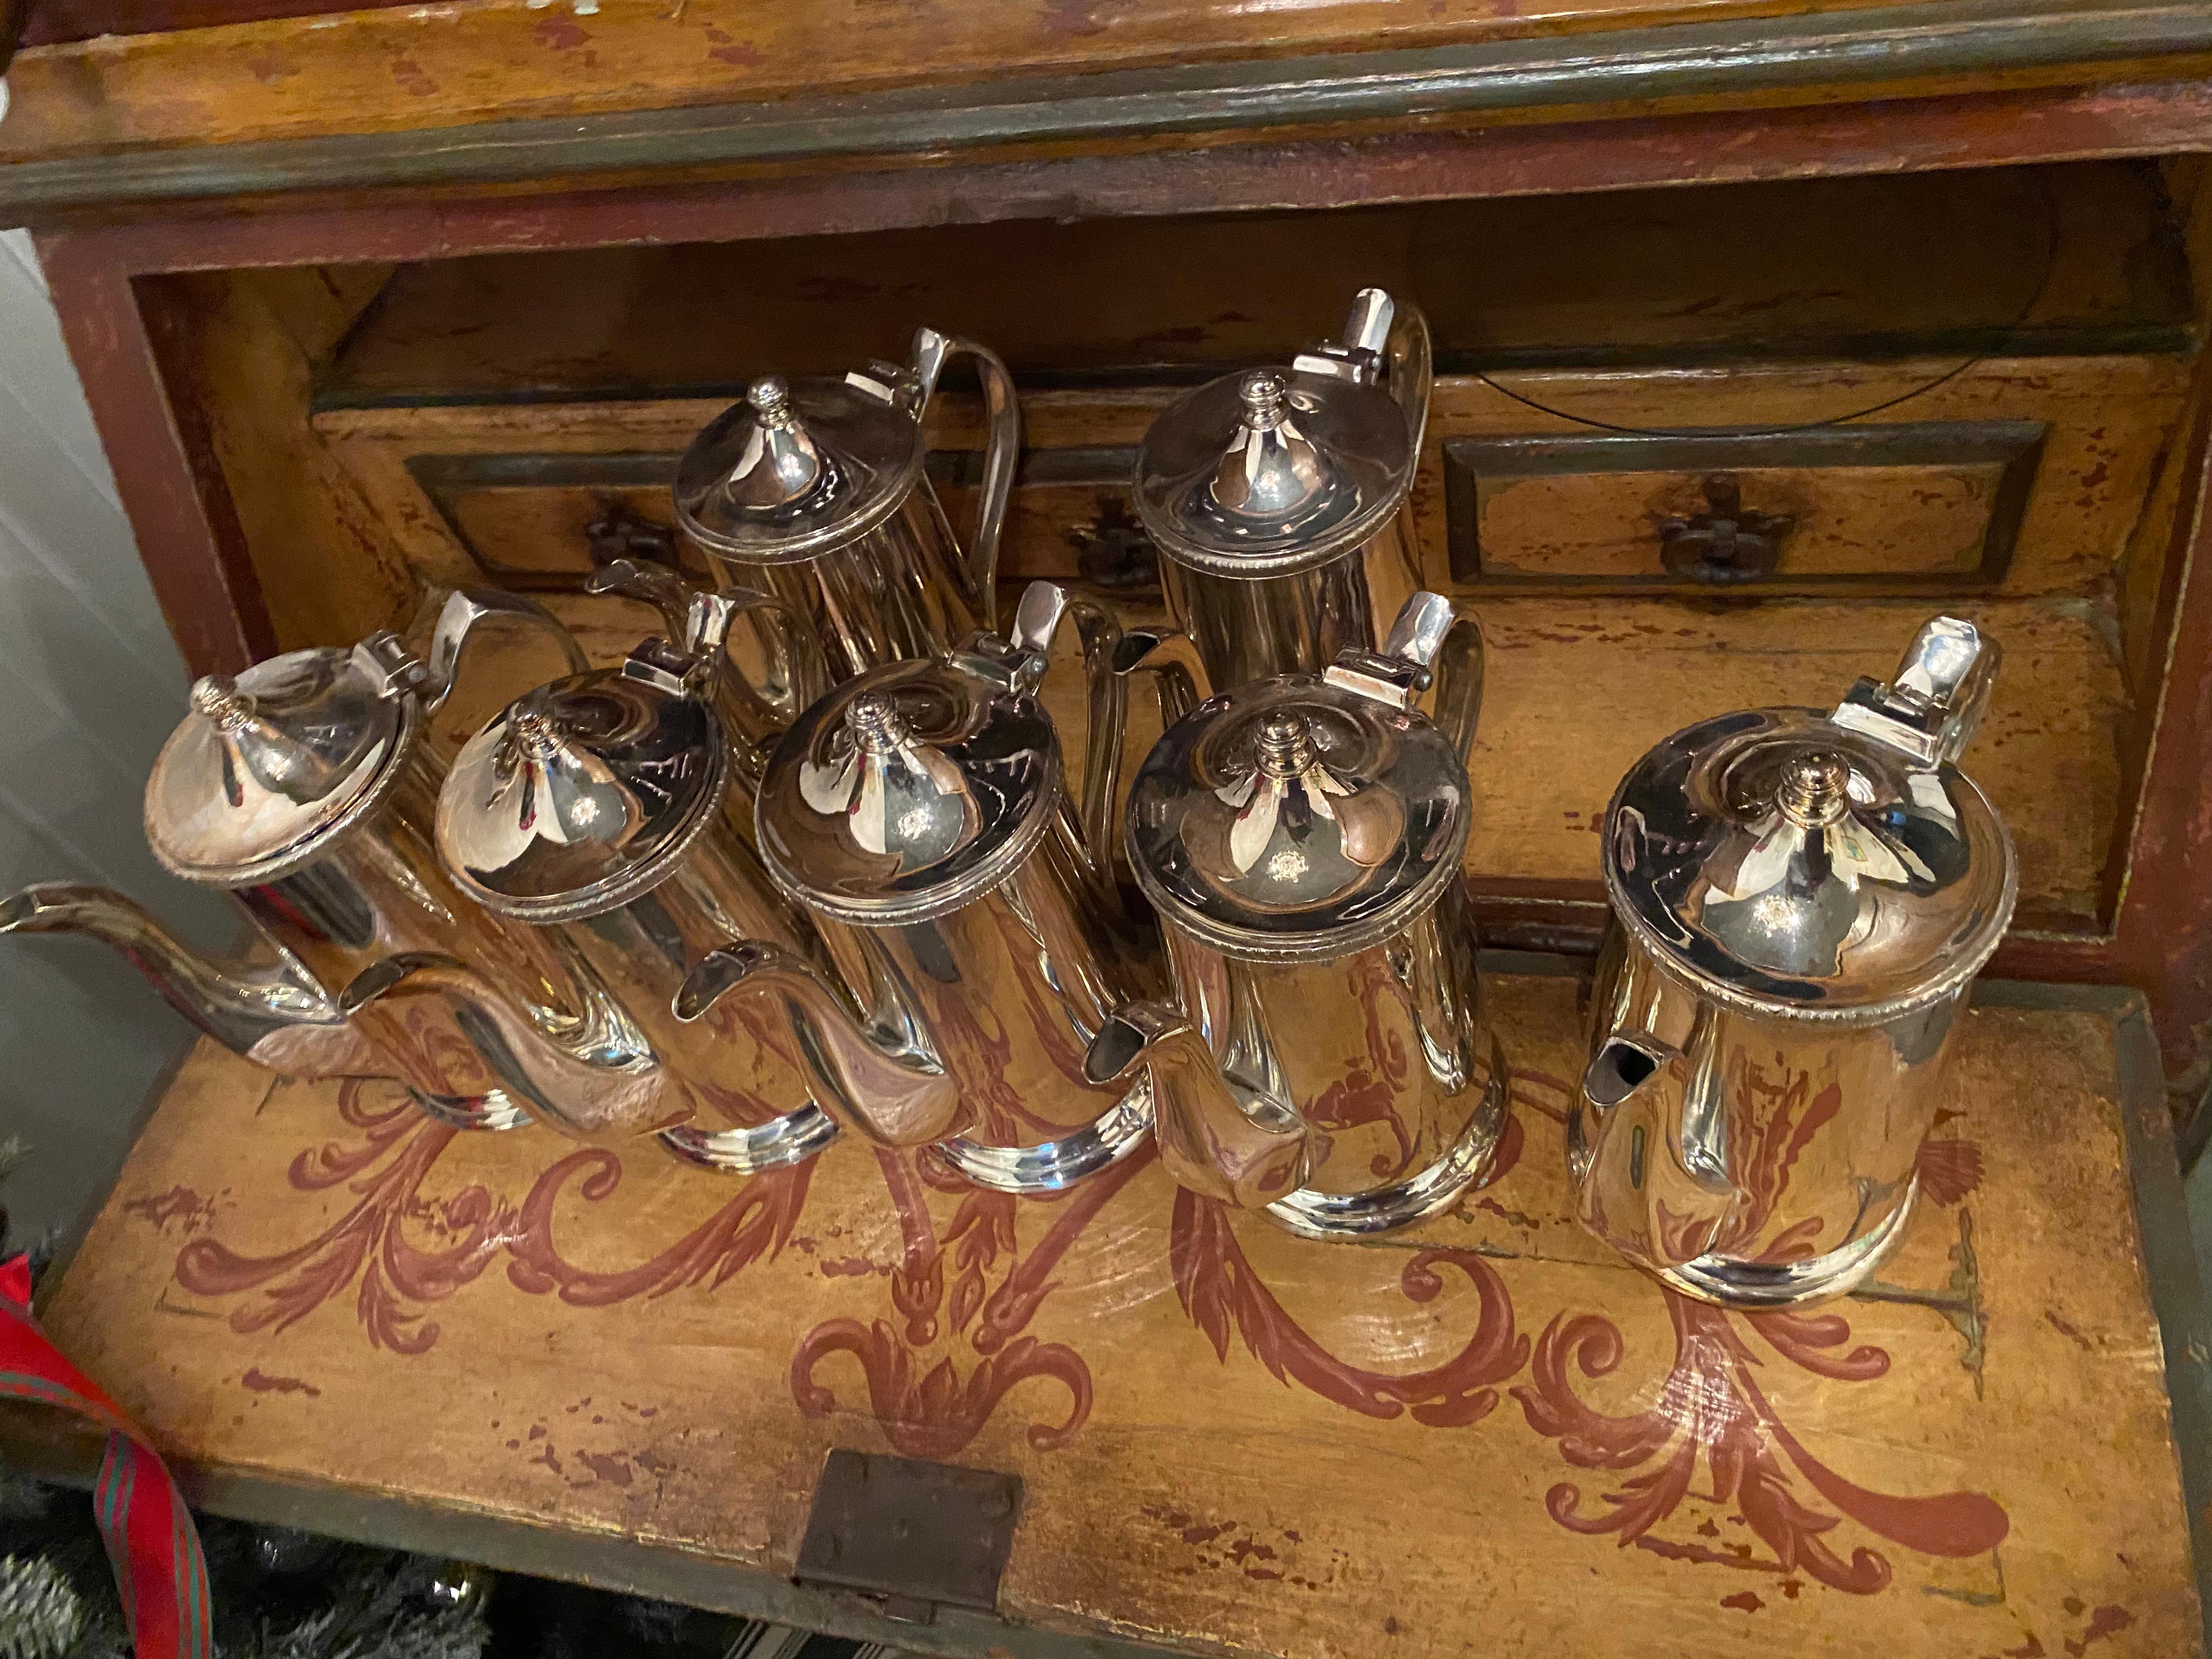 36 English Hotel Silver coffee/tea pots,Nice Weight And Quality. Priced Per Pot.  These came out of a very prestigious hotel and are in pristiine condition.  Great for decoration or use.  What a perfect vessel for flowers or watering your house